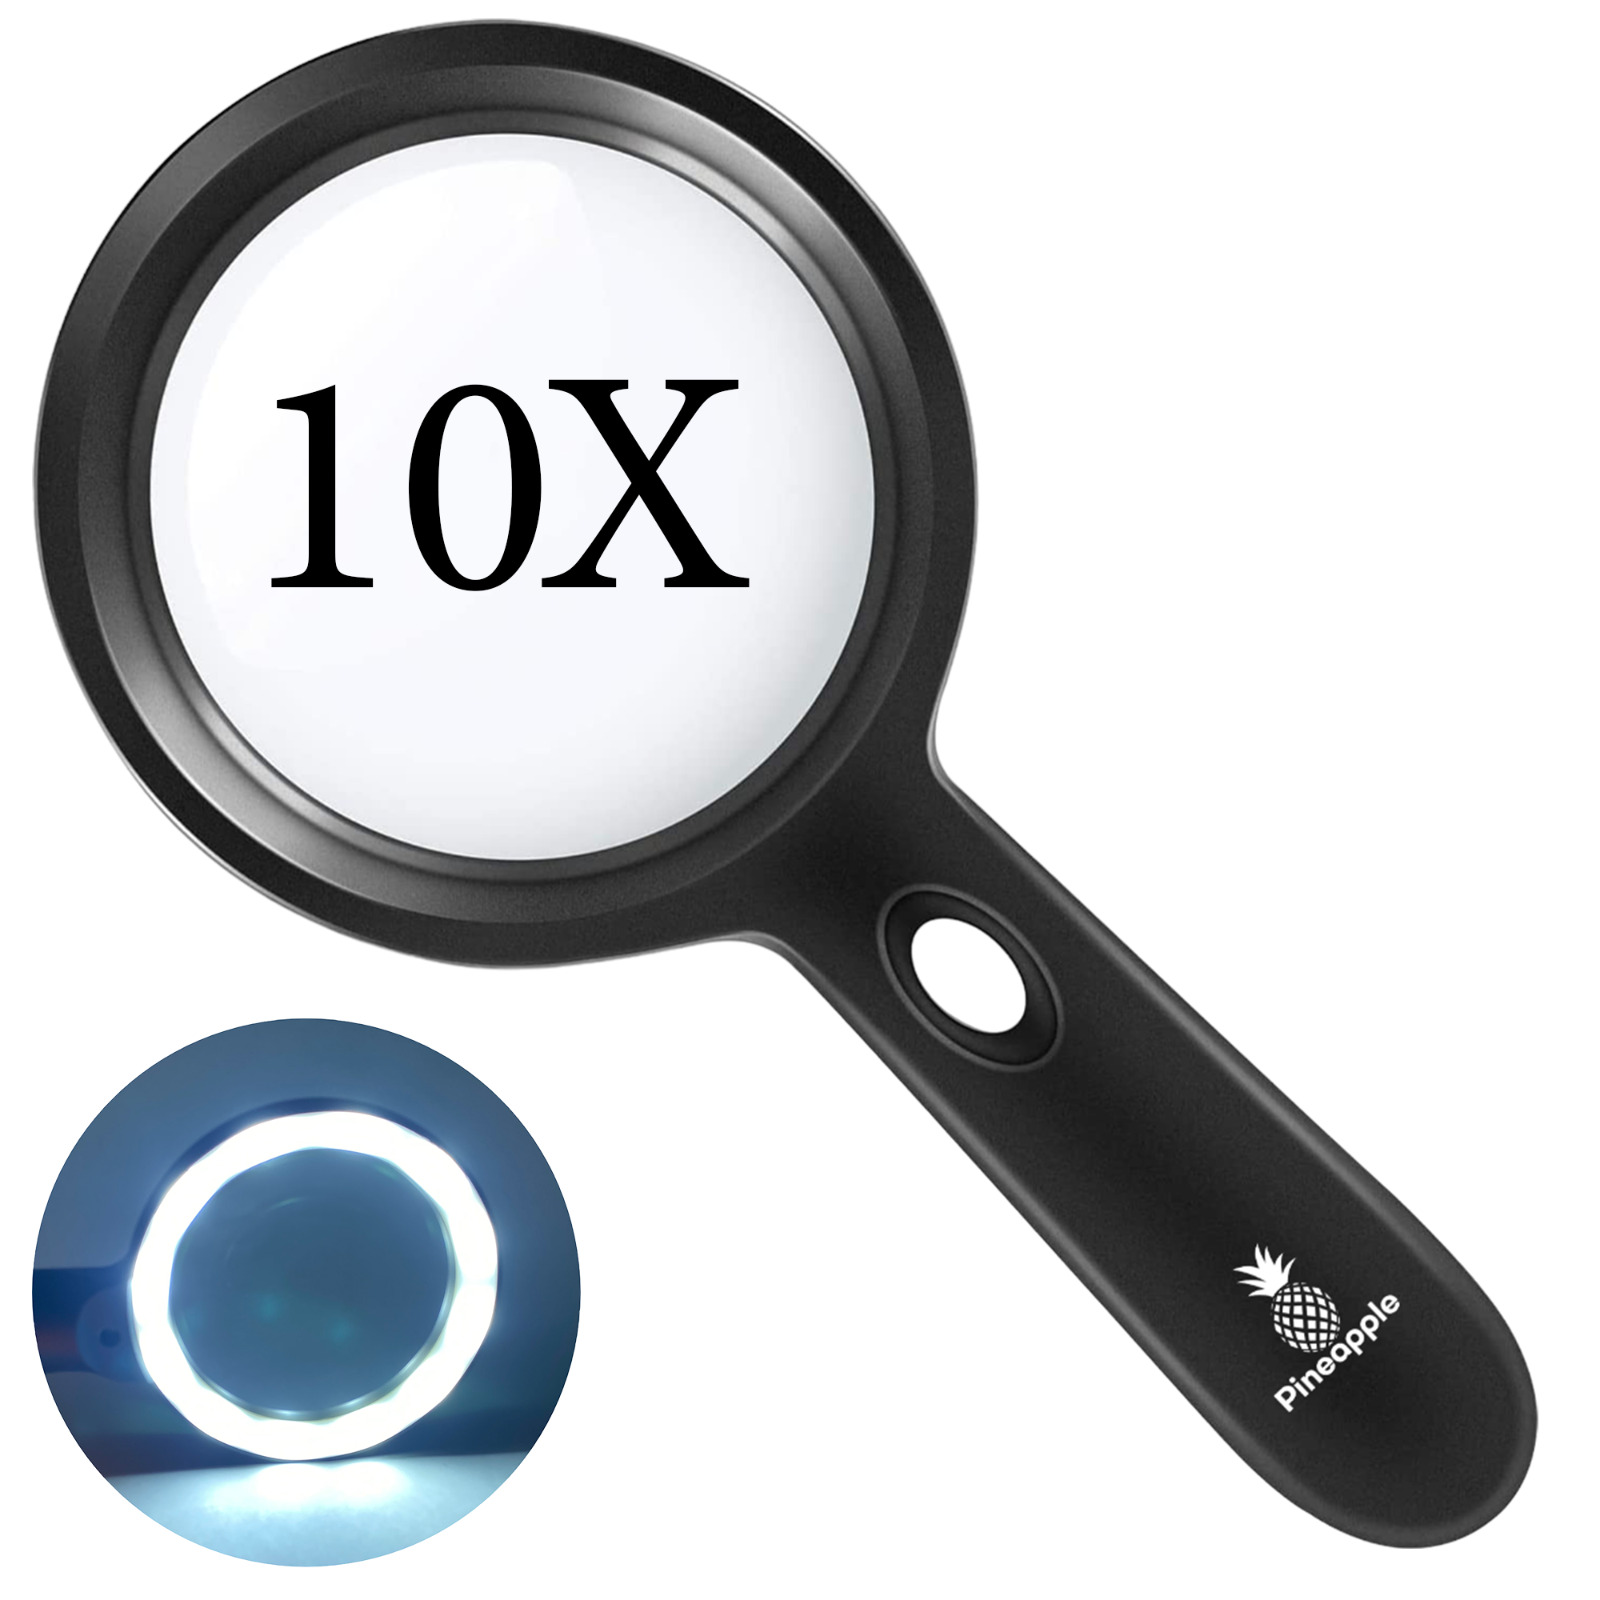 10X Magnifying Glass Magnifier with Light Large Handheld LED Lighted Eye Reading